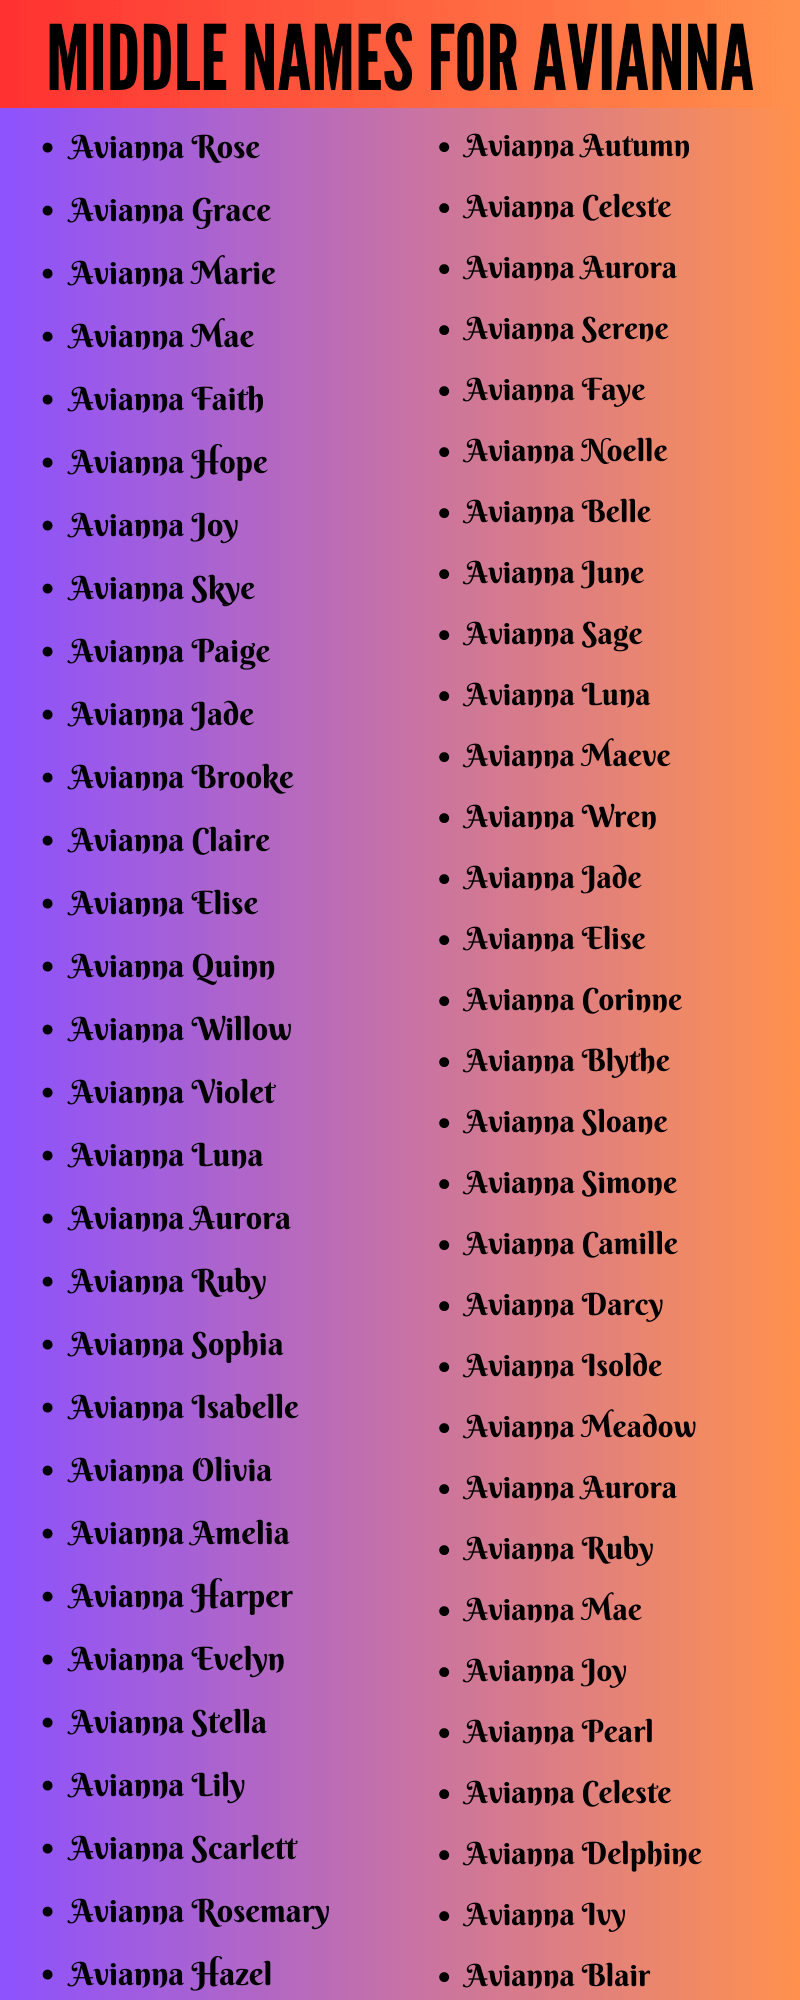 400 Middle Names For Avianna